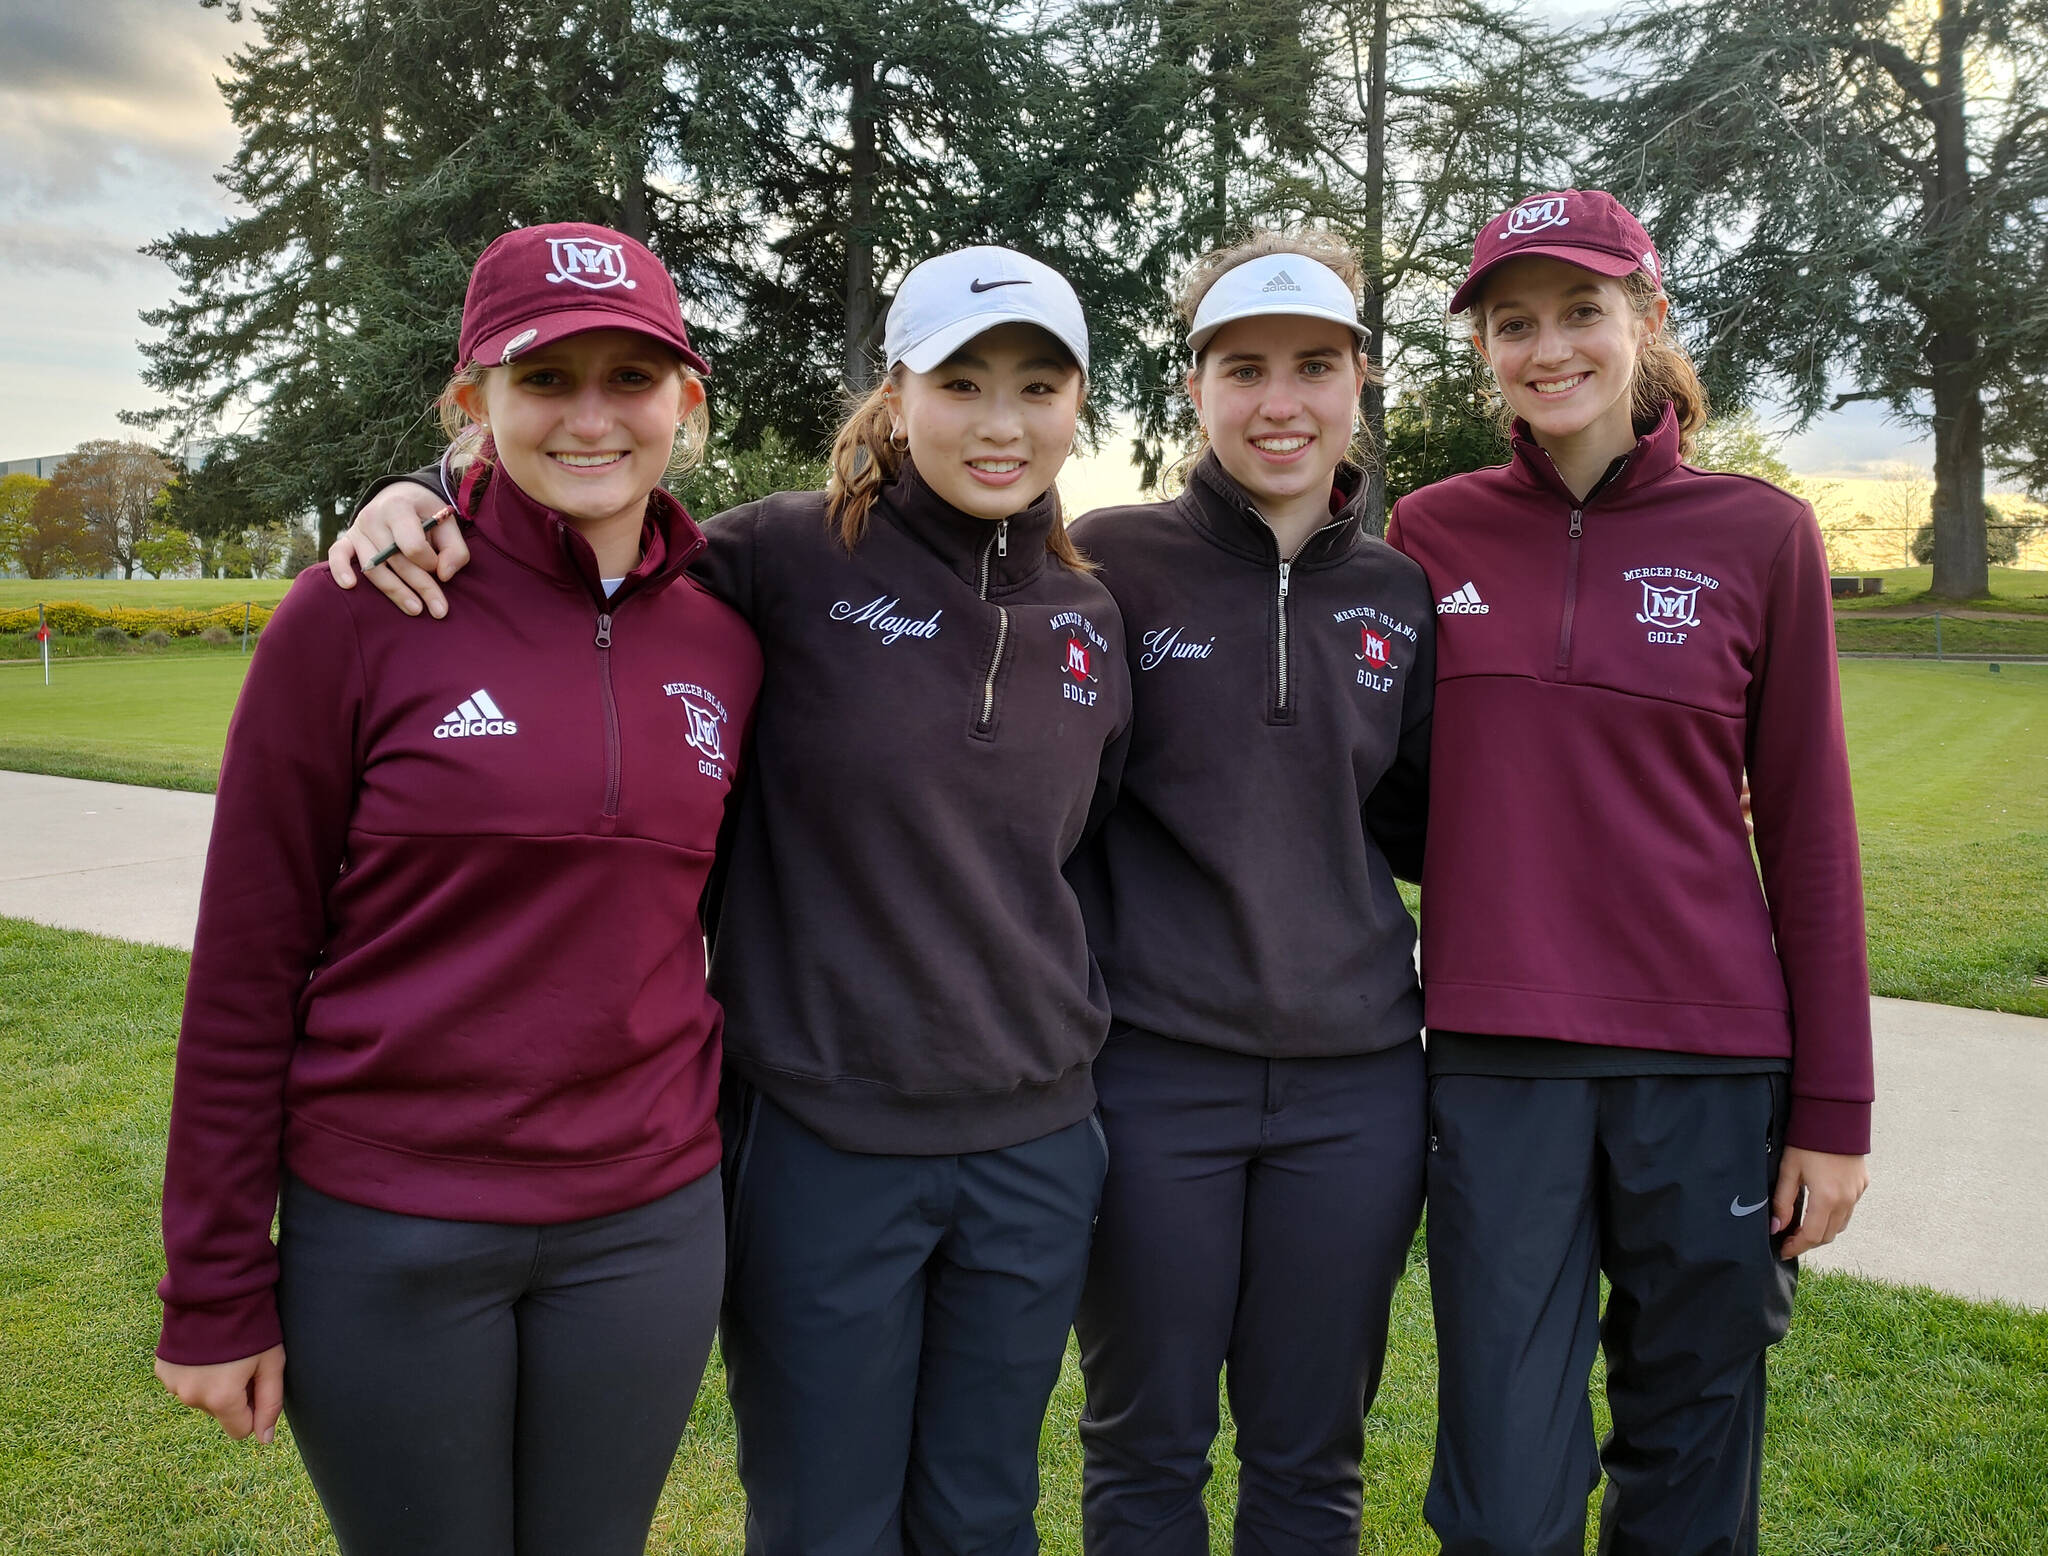 Mercer Island High School golfers, from left, Lucia Morelli, Mayah Park, Yumi Baston and Elle Evans. Andy Nystrom / staff photo